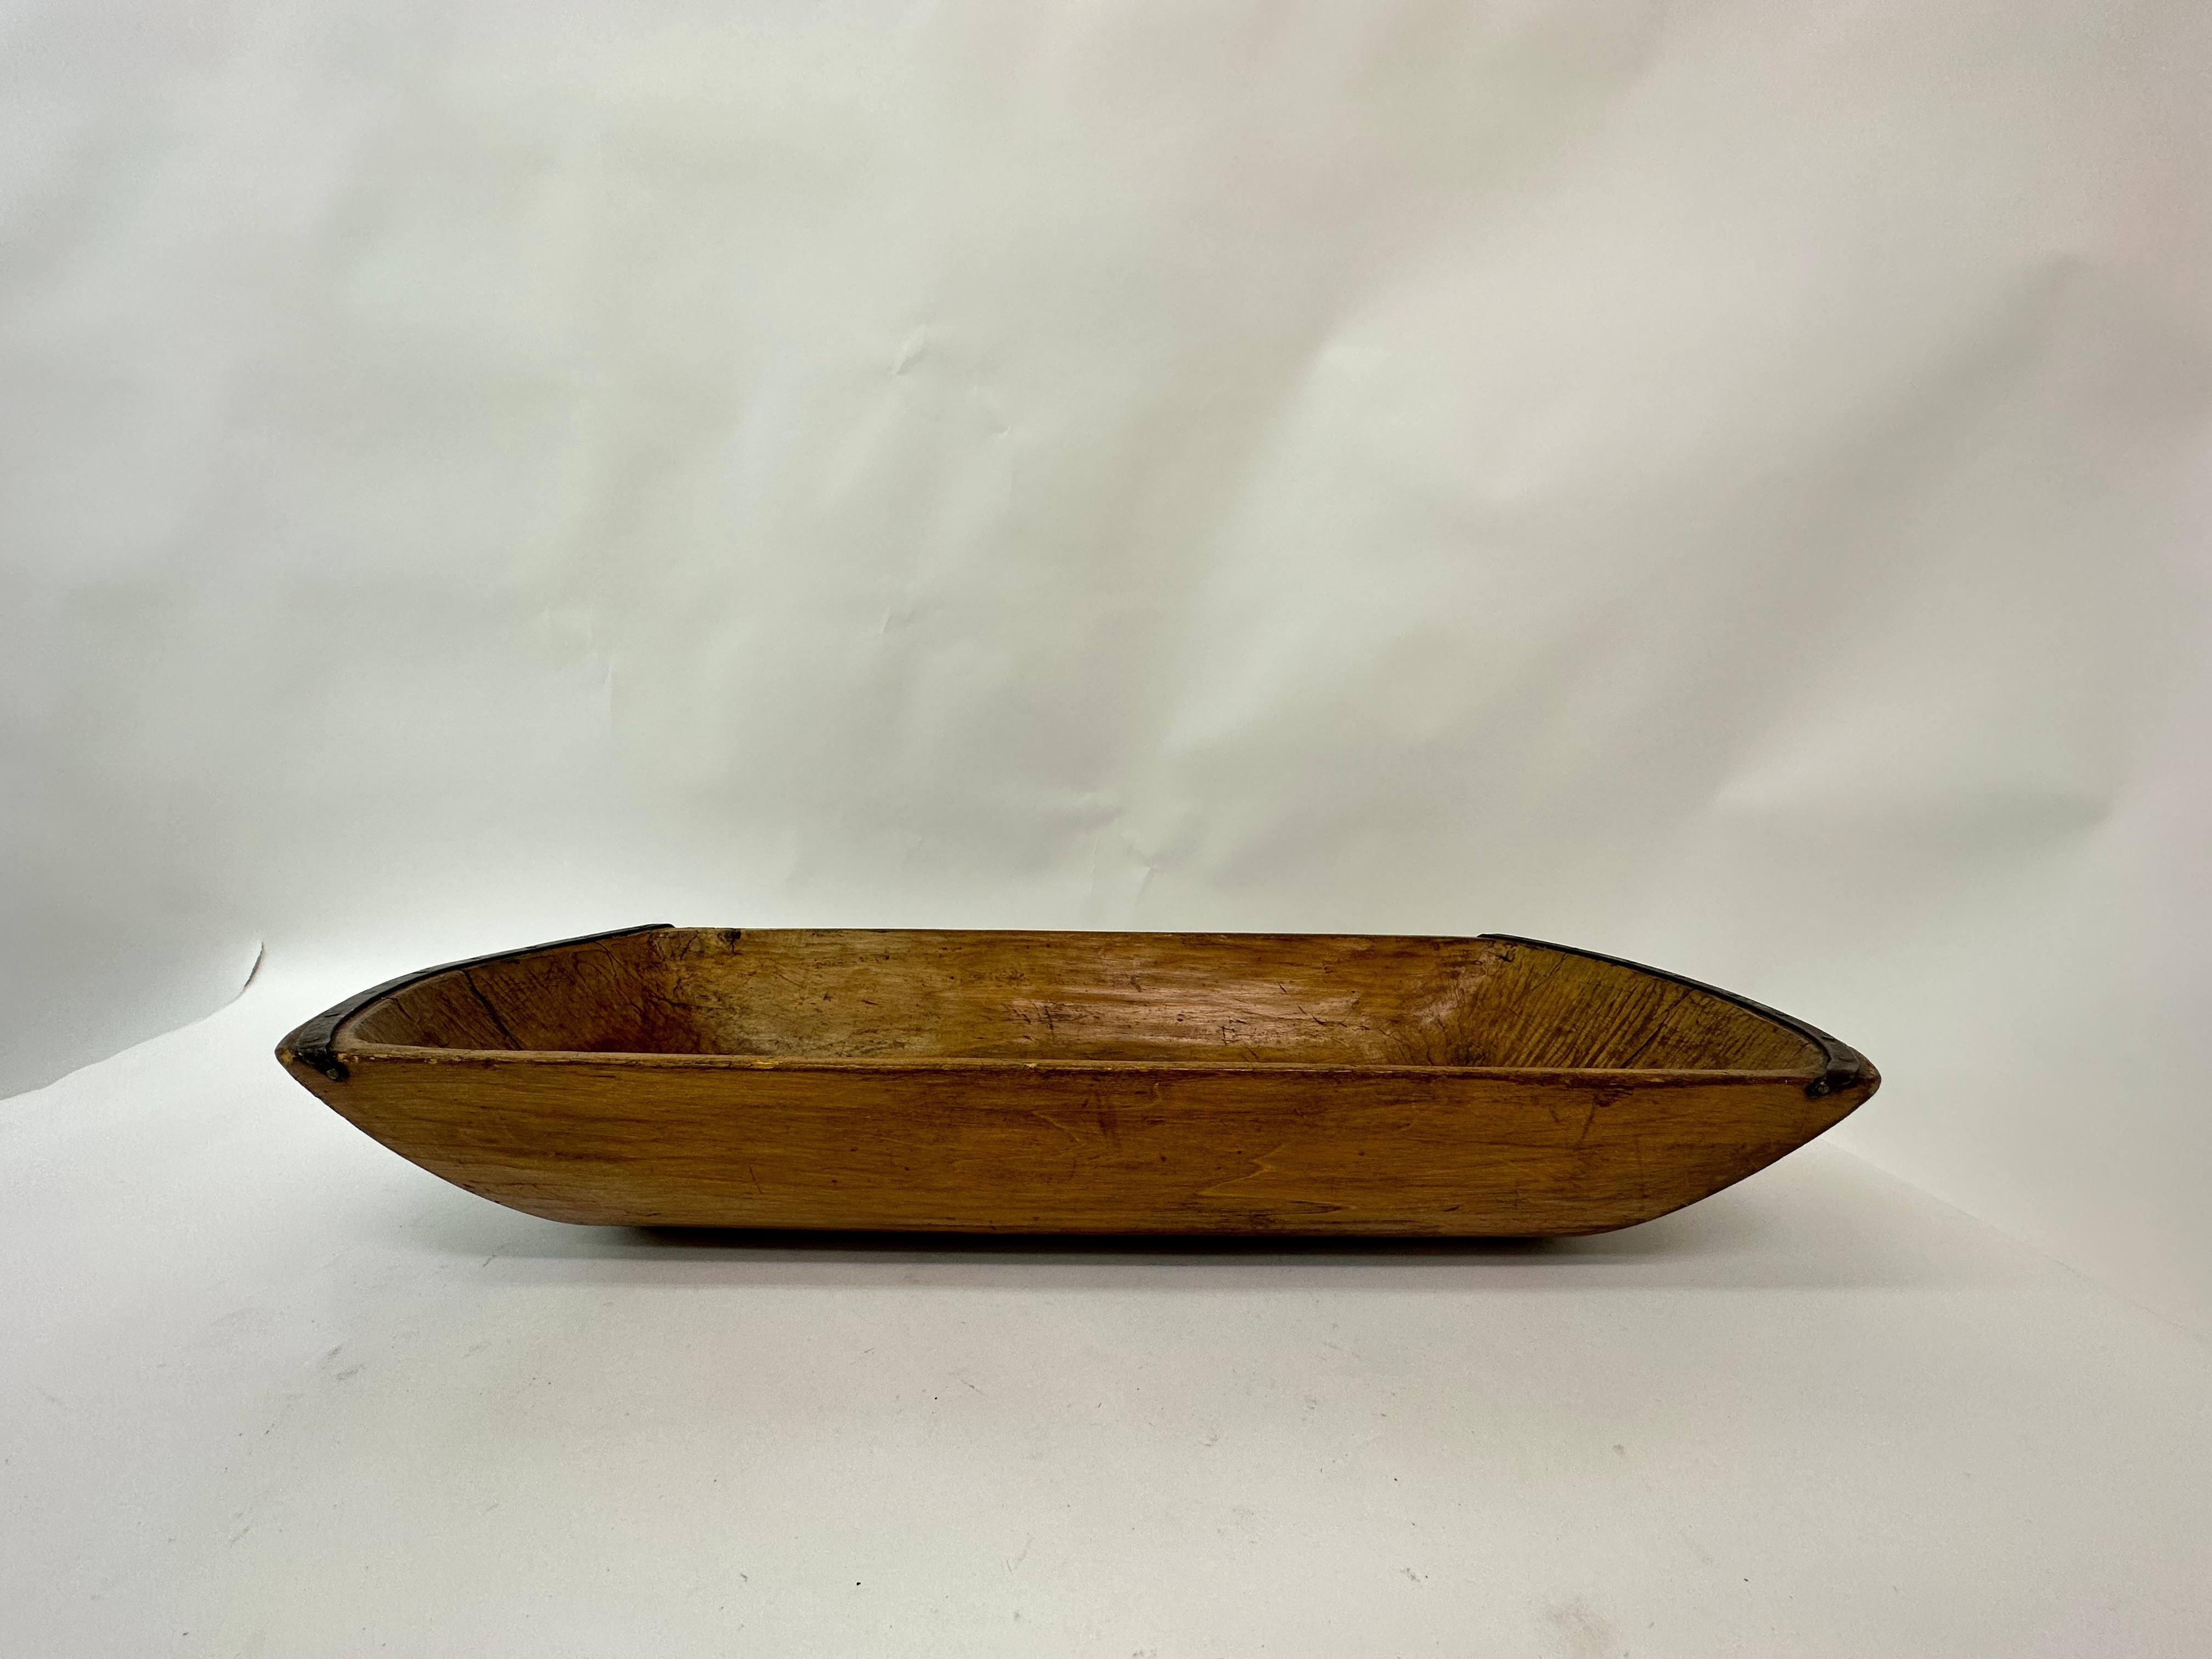 Iron Antique wooden dough bowl trough hand carved with metal details 1900’s